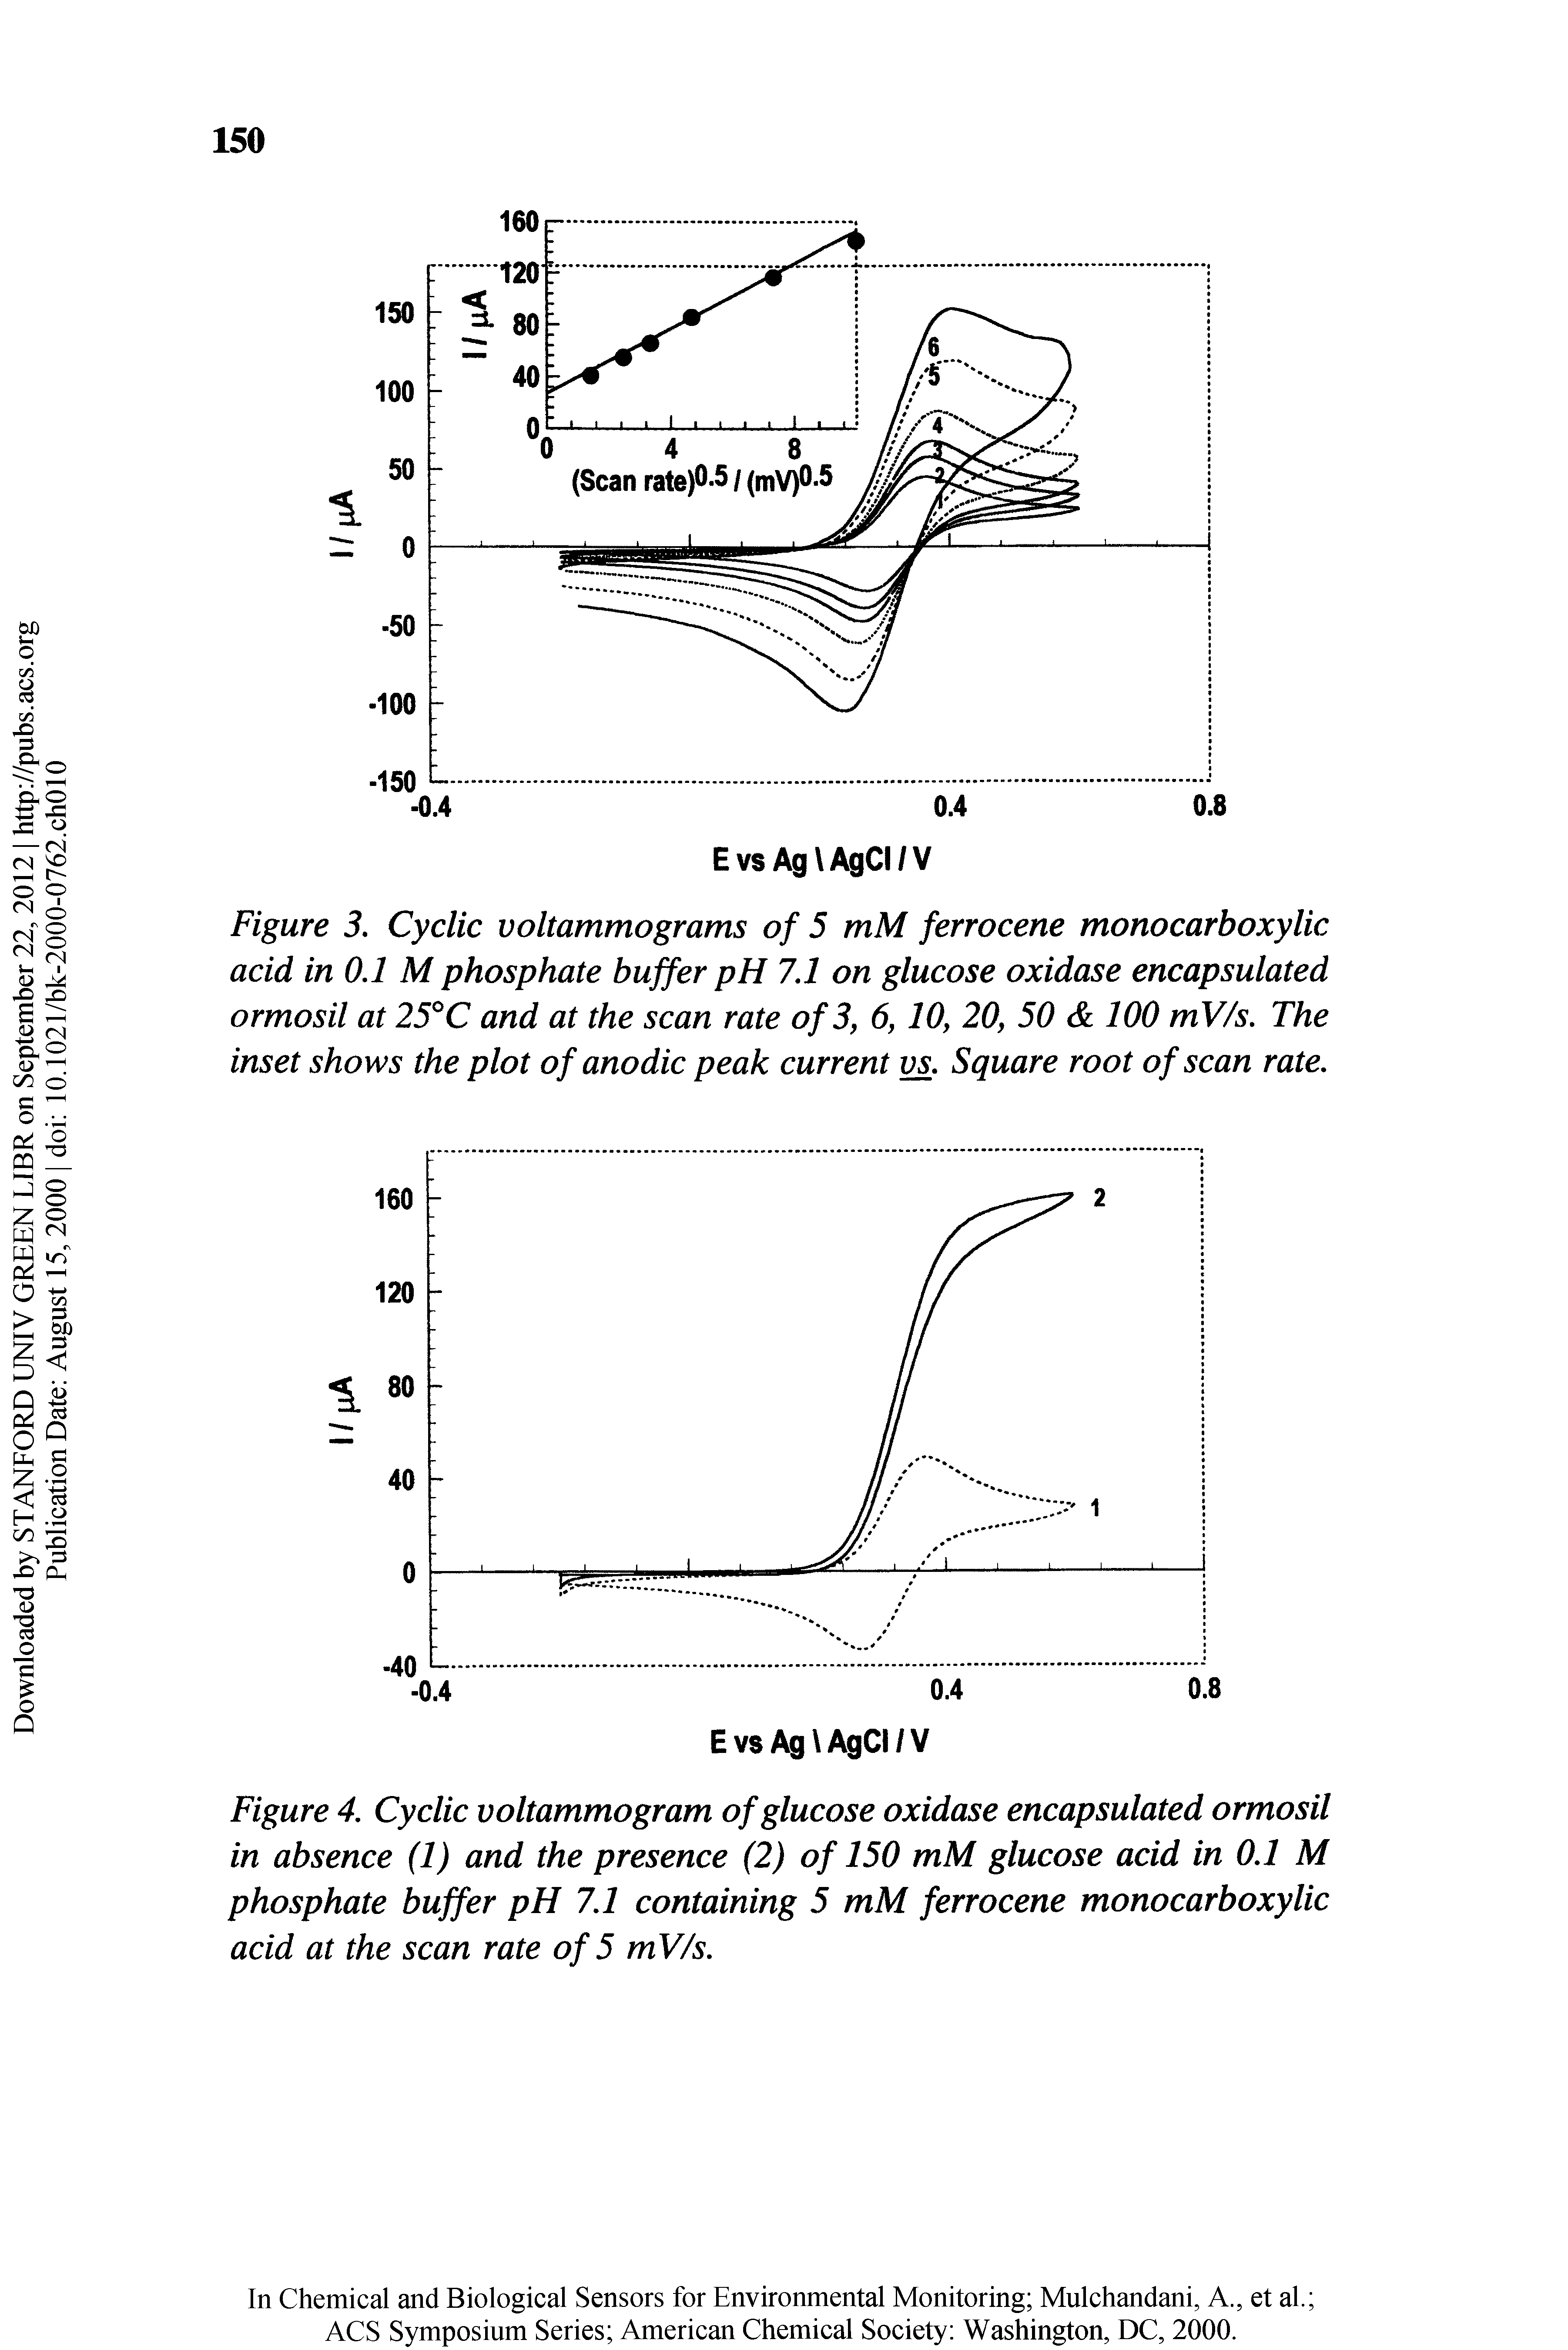 Figure 4. Cyclic voltammogram of glucose oxidase encapsulated ormosil in absence (1) and the presence (2) of 150 mM glucose acid in 0.1 M phosphate buffer pH 7.1 containing 5 mM ferrocene monocarboxylic acid at the scan rate of 5 mV/s.